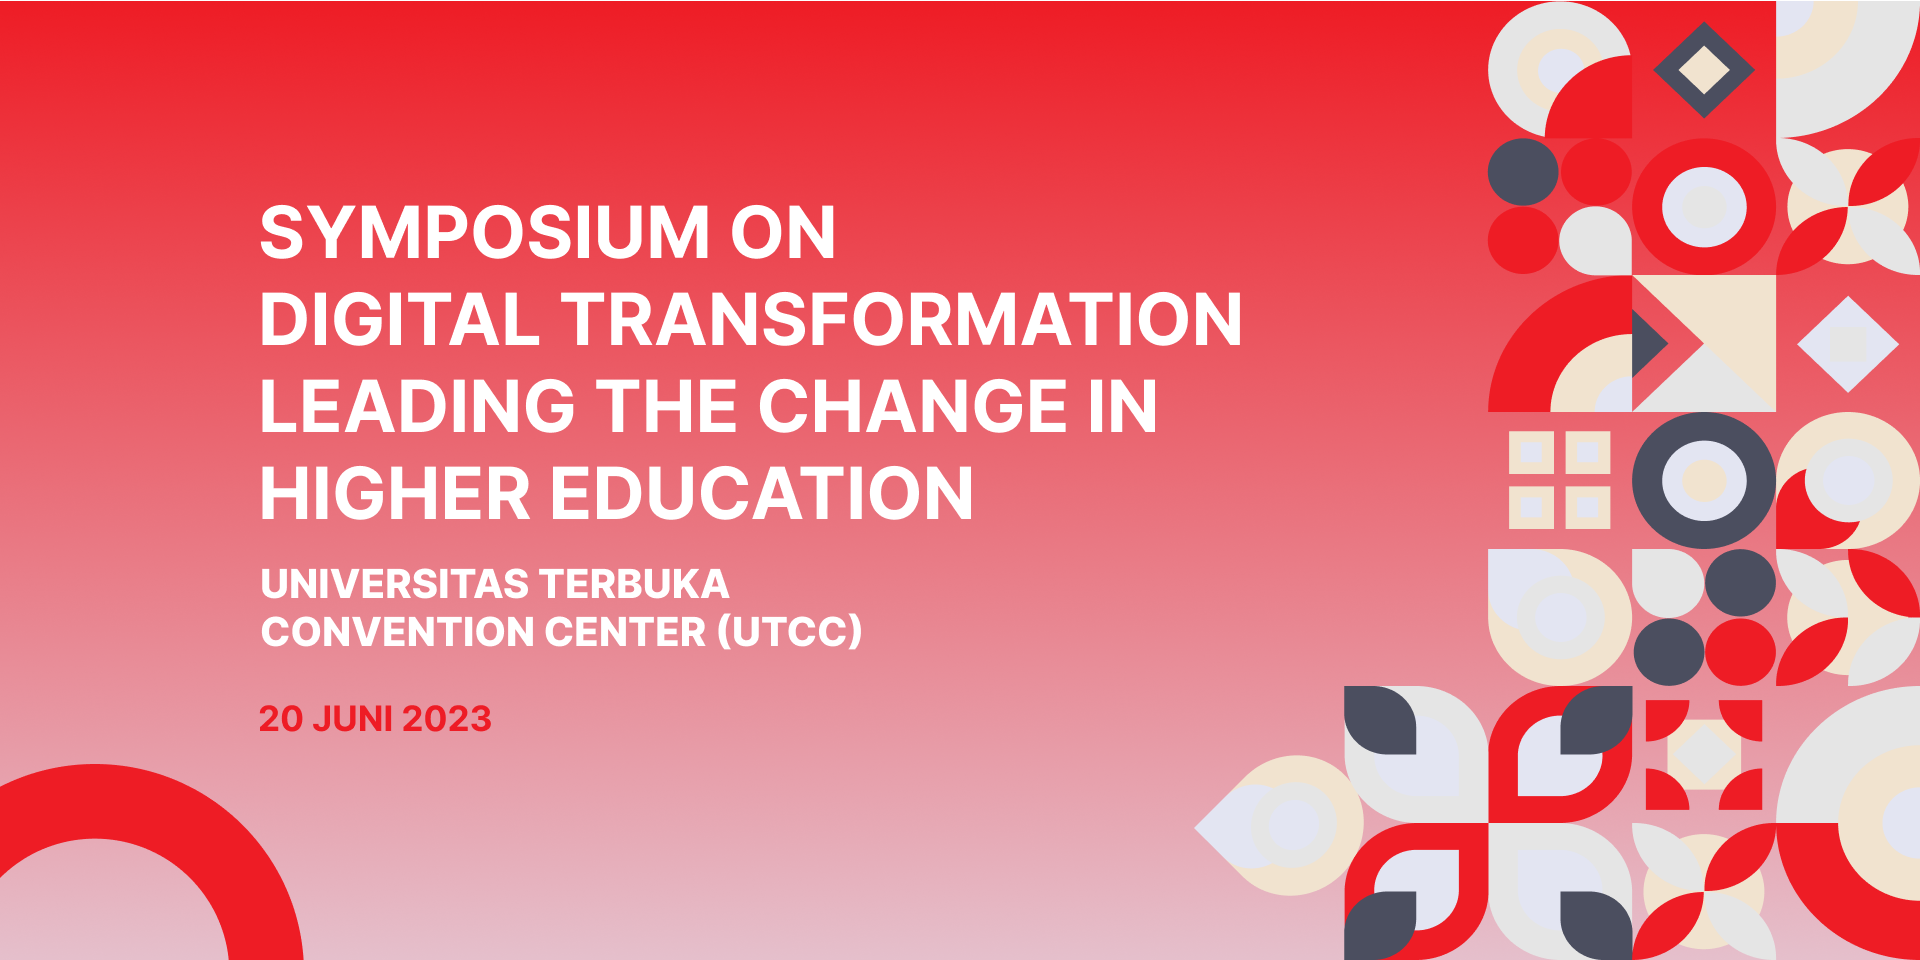 symposium-on-digital-transformation-leading-the-change-in-higher-education